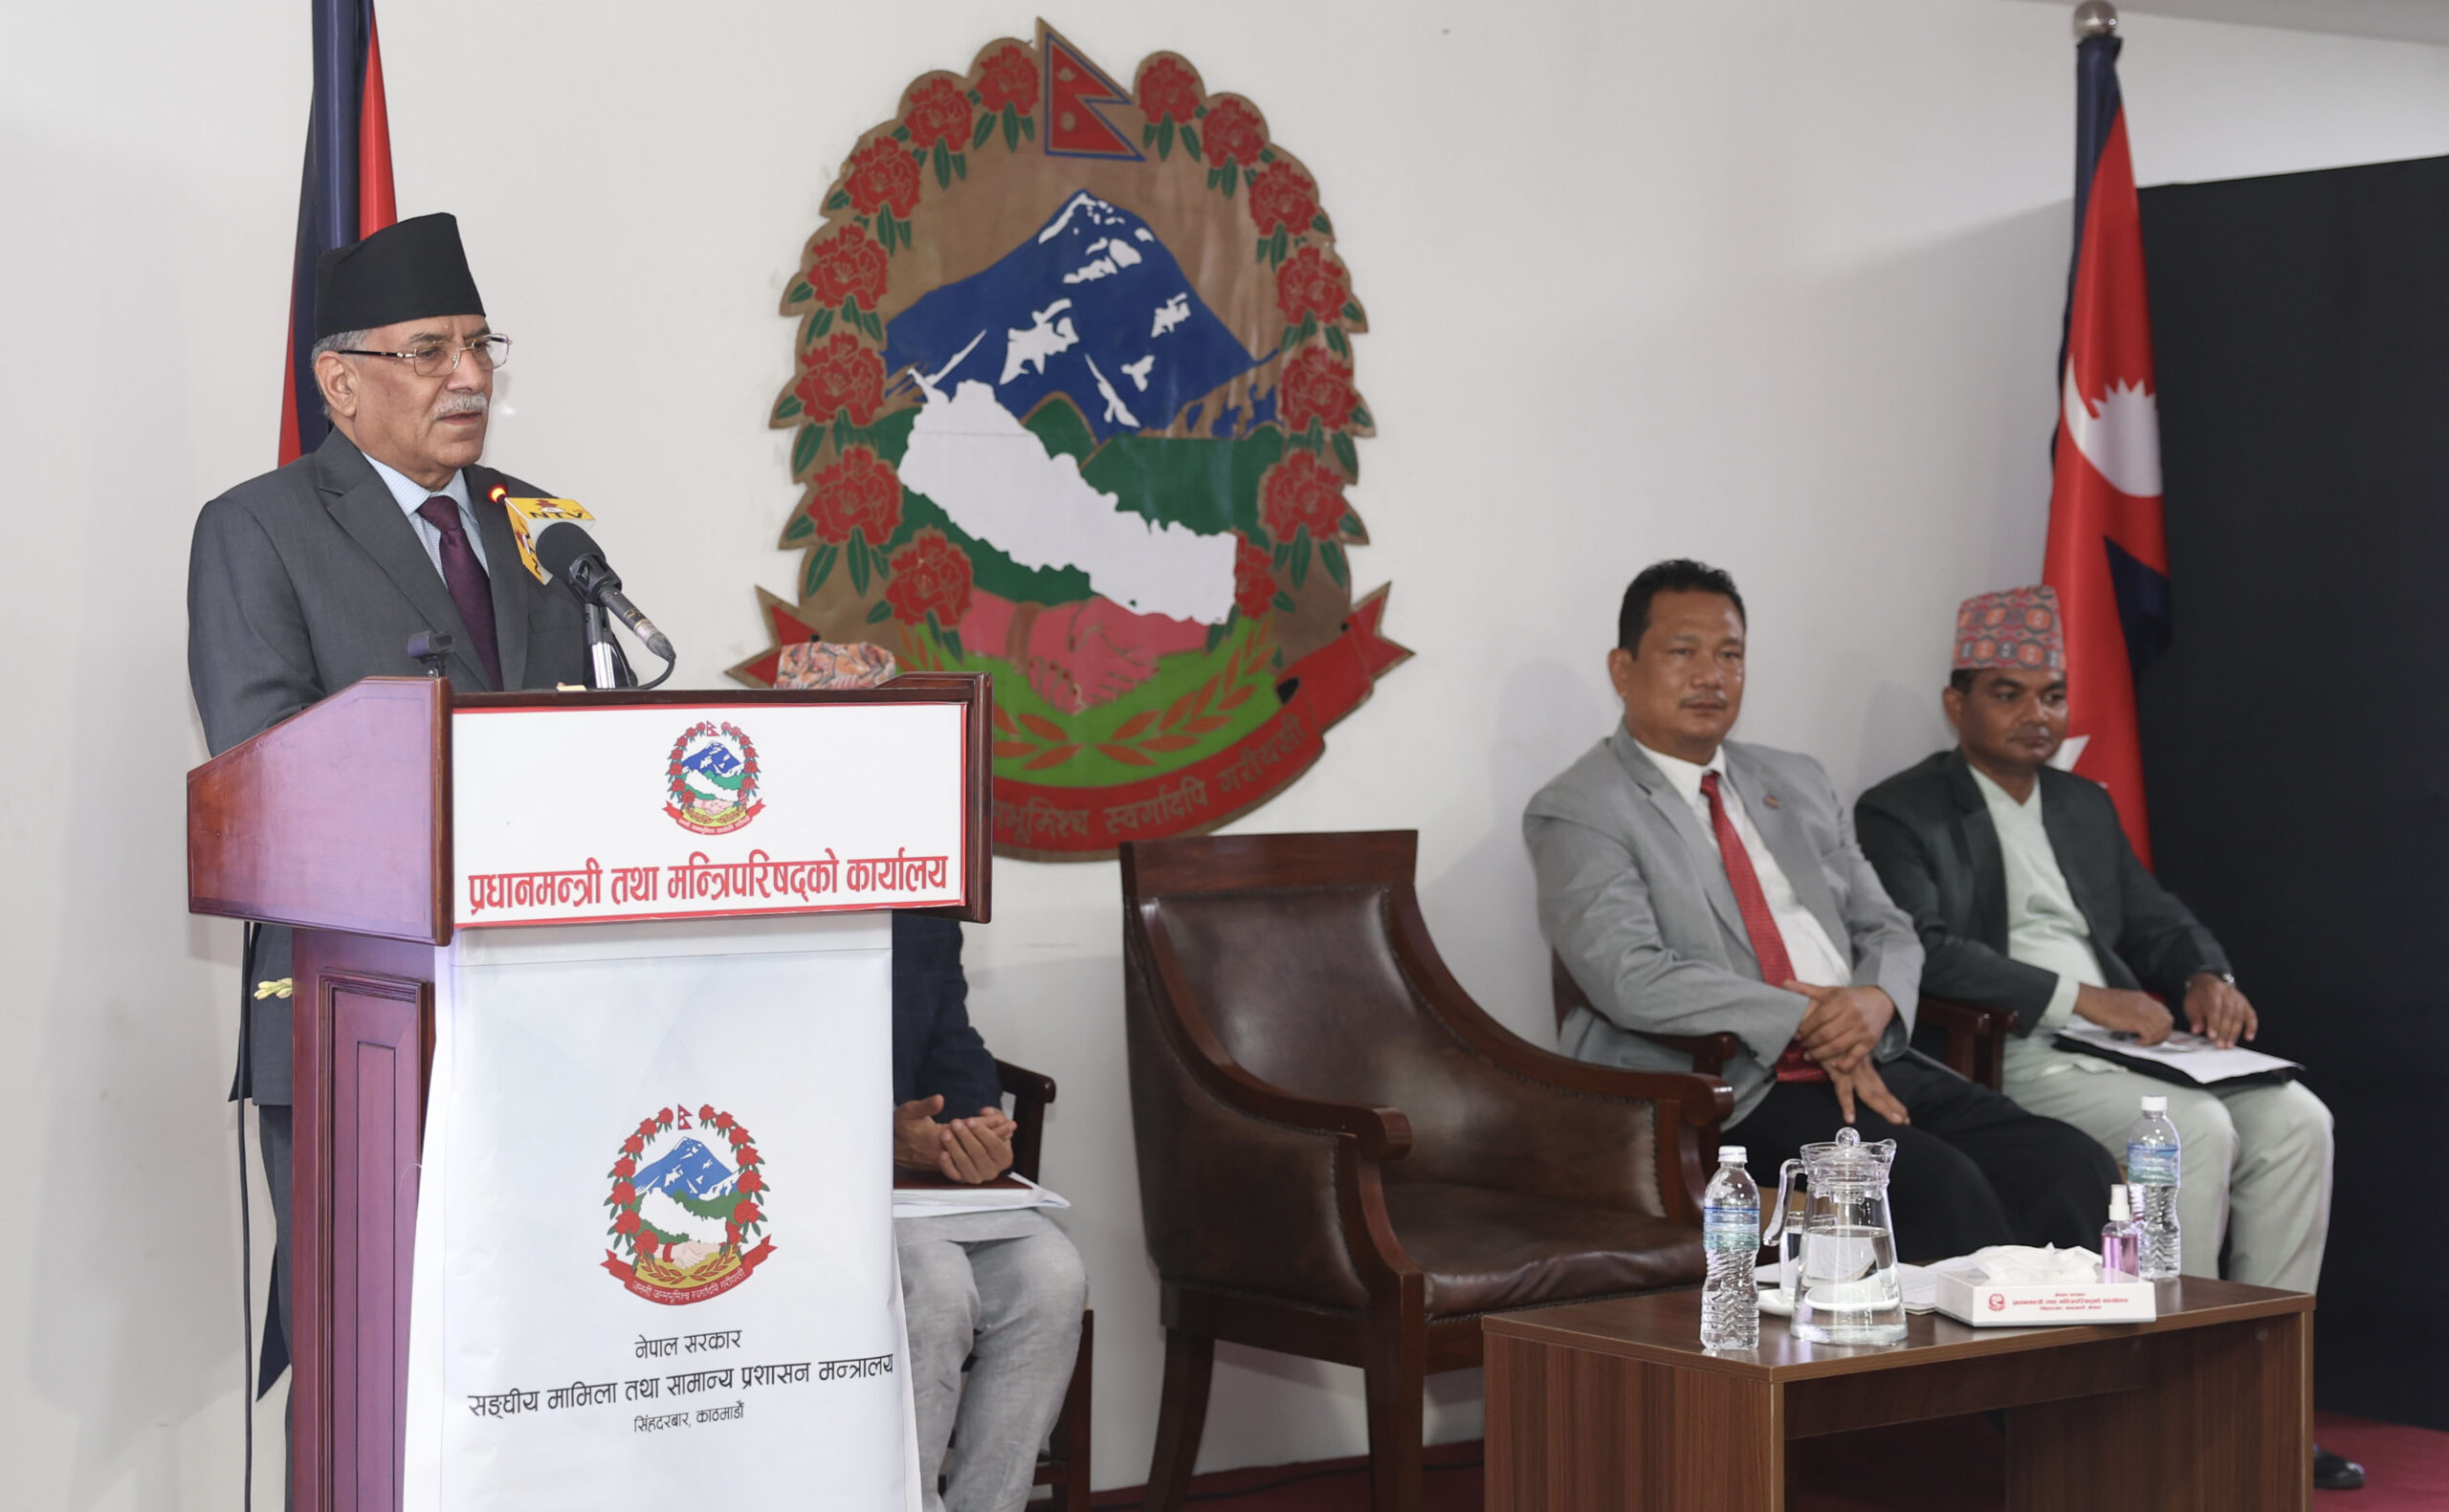 Innovative ideas must for country’s social transformation: PM Dahal